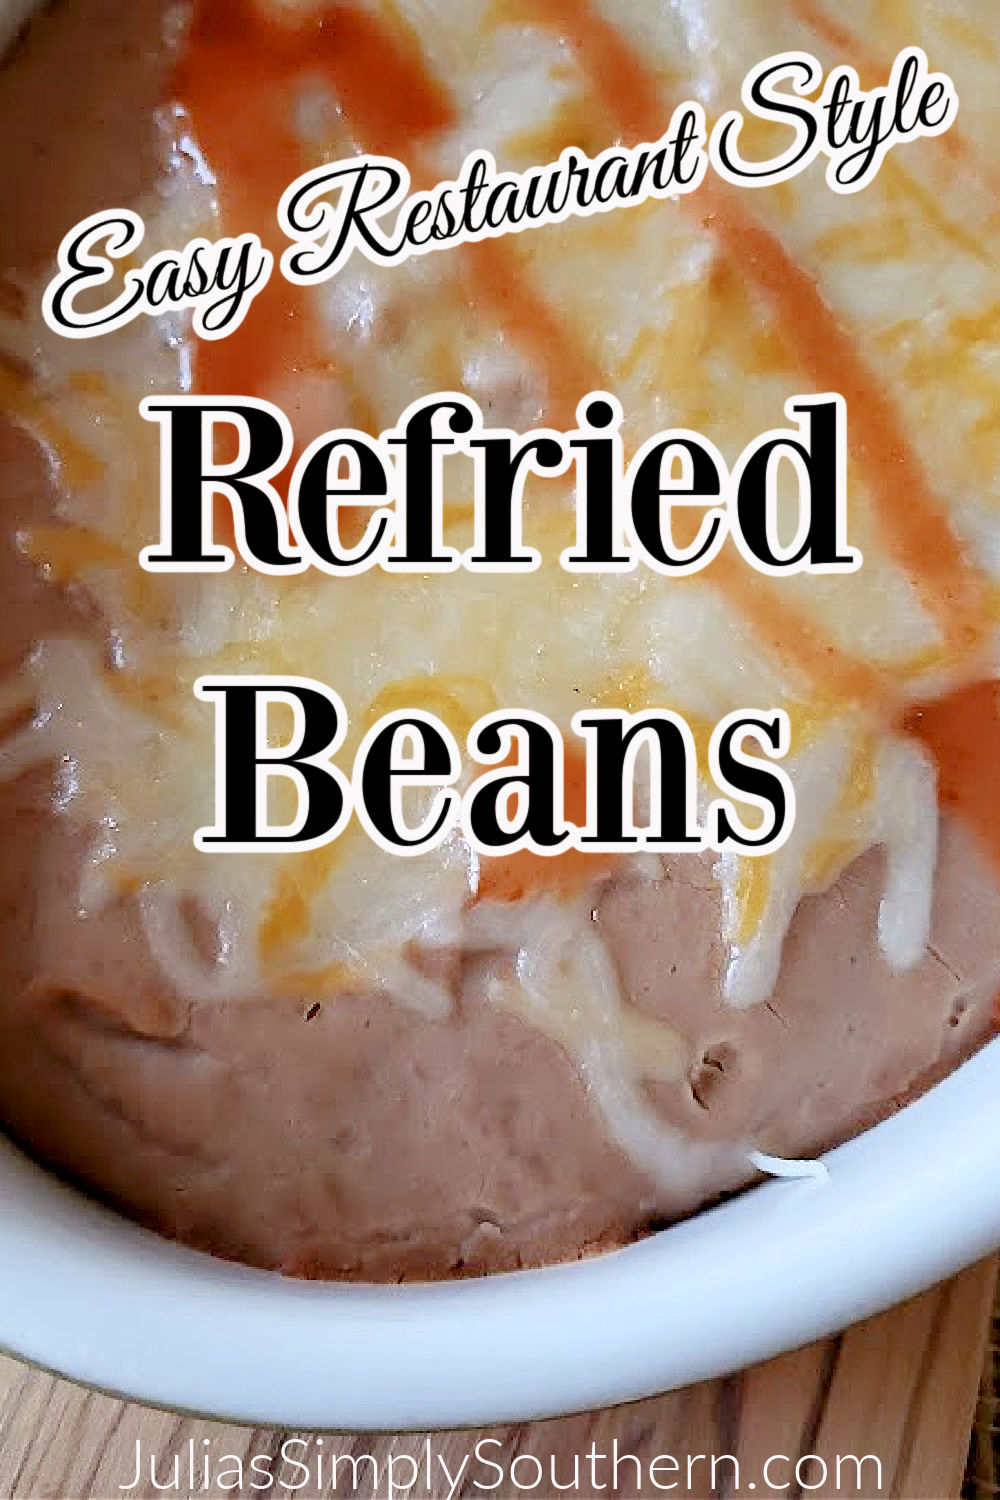 Easy Restaurant Style Refried Beans Recipe - Julias Simply Southern